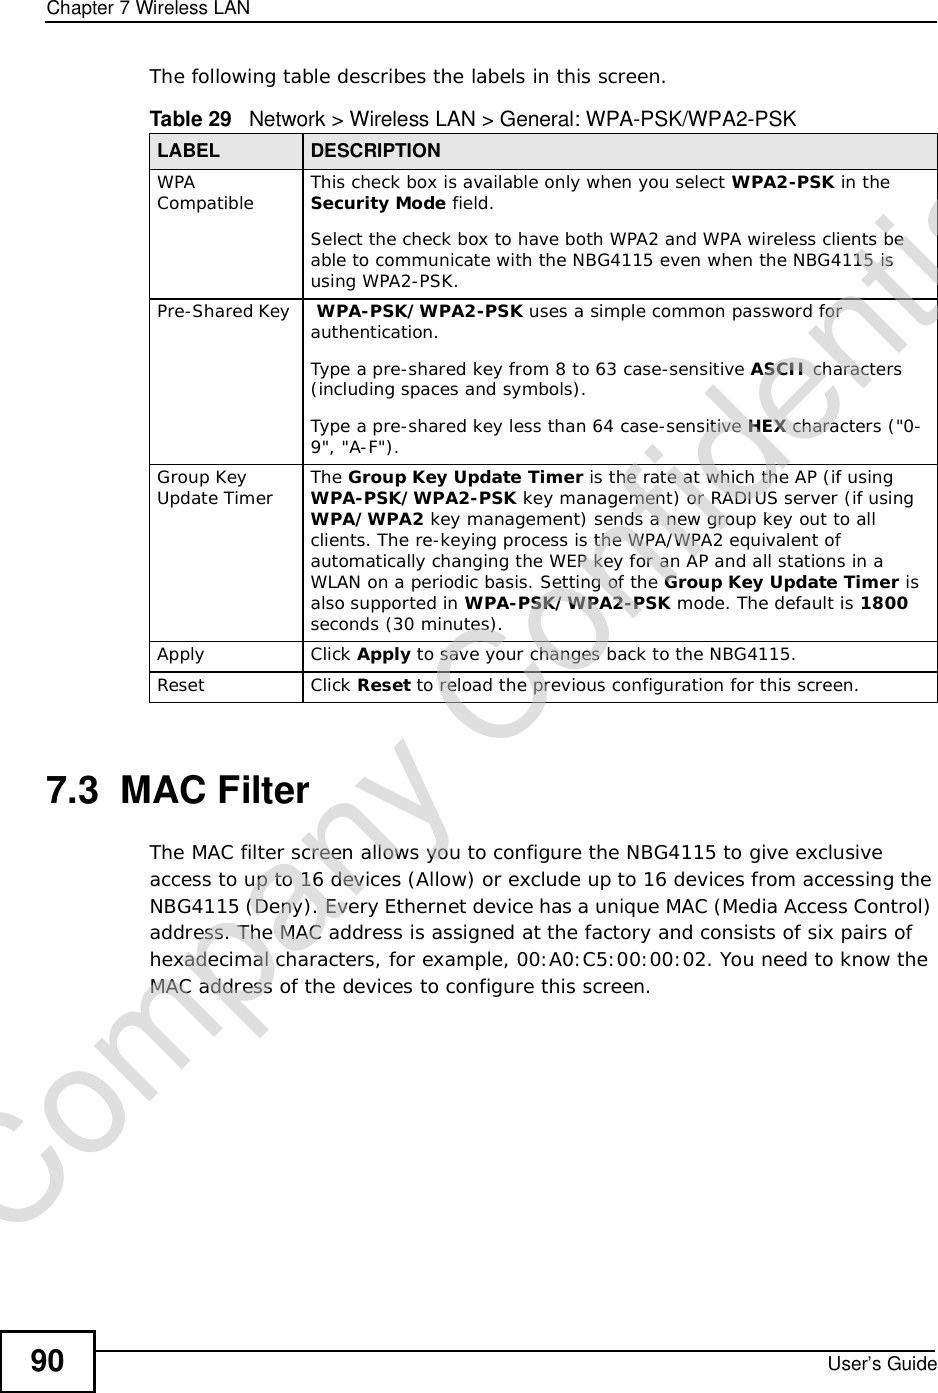 Chapter 7Wireless LANUser’s Guide90The following table describes the labels in this screen.7.3  MAC FilterThe MAC filter screen allows you to configure the NBG4115 to give exclusive access to up to 16 devices (Allow) or exclude up to 16 devices from accessing the NBG4115 (Deny). Every Ethernet device has a unique MAC (Media Access Control) address. The MAC address is assigned at the factory and consists of six pairs of hexadecimal characters, for example, 00:A0:C5:00:00:02. You need to know the MAC address of the devices to configure this screen.Table 29   Network &gt; Wireless LAN &gt; General: WPA-PSK/WPA2-PSKLABEL DESCRIPTIONWPA Compatible This check box is available only when you select WPA2-PSK in the Security Mode field.Select the check box to have both WPA2 and WPA wireless clients be able to communicate with the NBG4115 even when the NBG4115 is using WPA2-PSK.Pre-Shared Key  WPA-PSK/WPA2-PSK uses a simple common password for authentication.Type a pre-shared key from 8 to 63 case-sensitive ASCII characters (including spaces and symbols).Type a pre-shared key less than 64 case-sensitive HEX characters (&quot;0-9&quot;, &quot;A-F&quot;).Group Key Update Timer The Group Key Update Timer is the rate at which the AP (if using WPA-PSK/WPA2-PSK key management) or RADIUSserver (if using WPA/WPA2 key management) sends a new group key out to all clients. The re-keying process is the WPA/WPA2 equivalent of automatically changing the WEP key for an AP and all stations in a WLAN on a periodic basis. Setting of the Group Key Update Timer is also supported in WPA-PSK/WPA2-PSK mode. The default is 1800seconds (30 minutes).Apply Click Apply to save your changes back to the NBG4115.Reset Click Reset to reload the previous configuration for this screen.Company Confidential